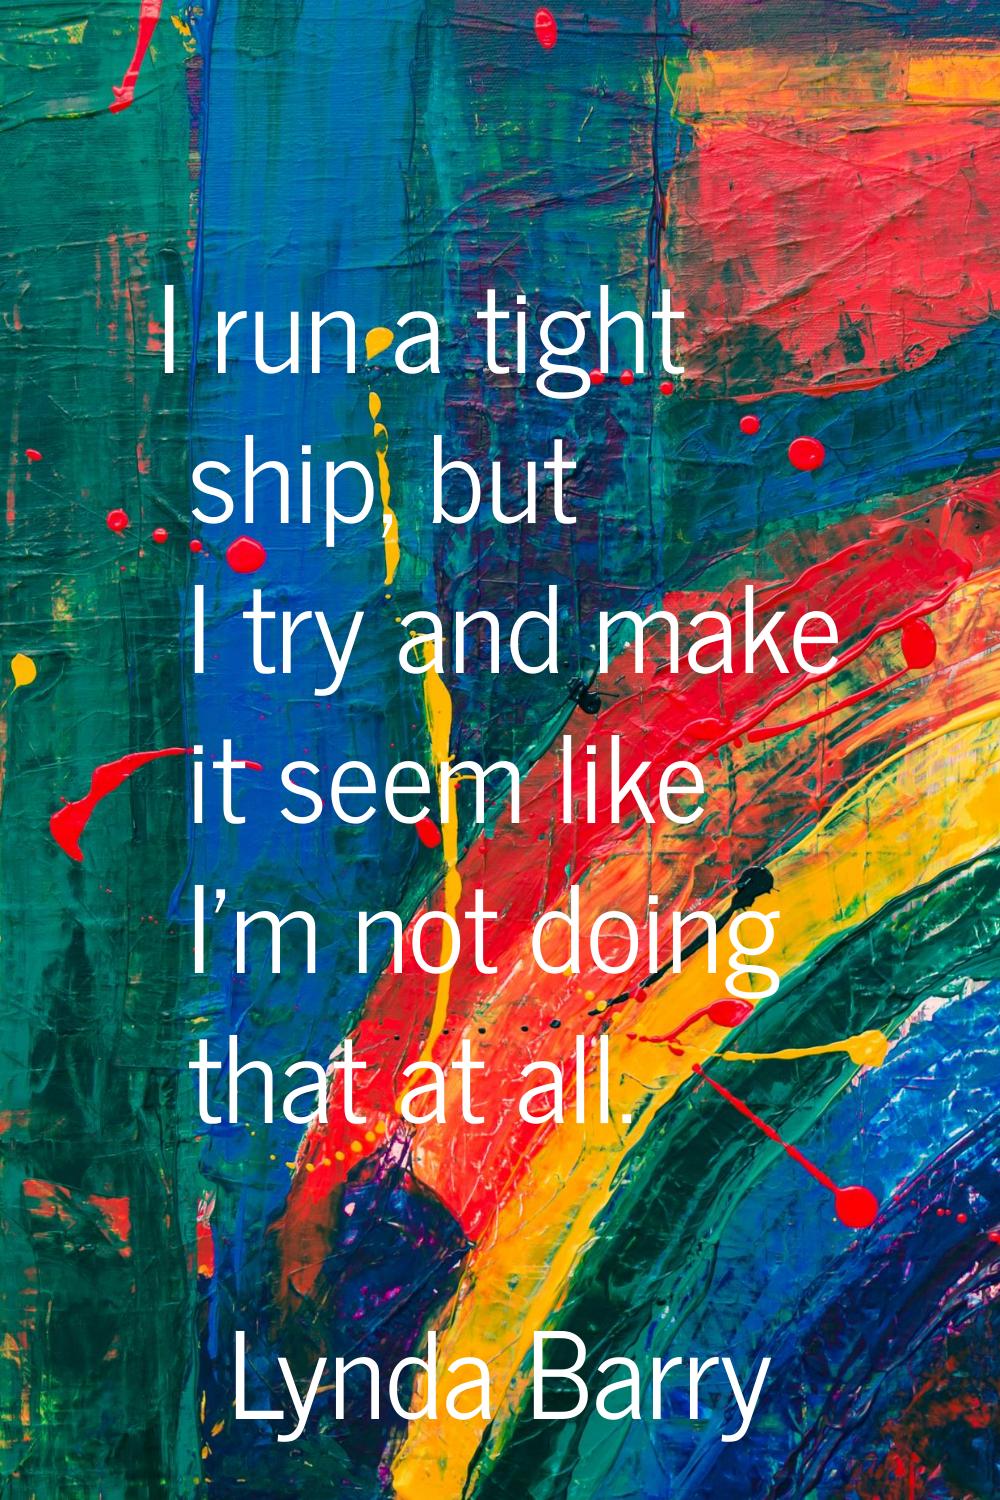 I run a tight ship, but I try and make it seem like I'm not doing that at all.